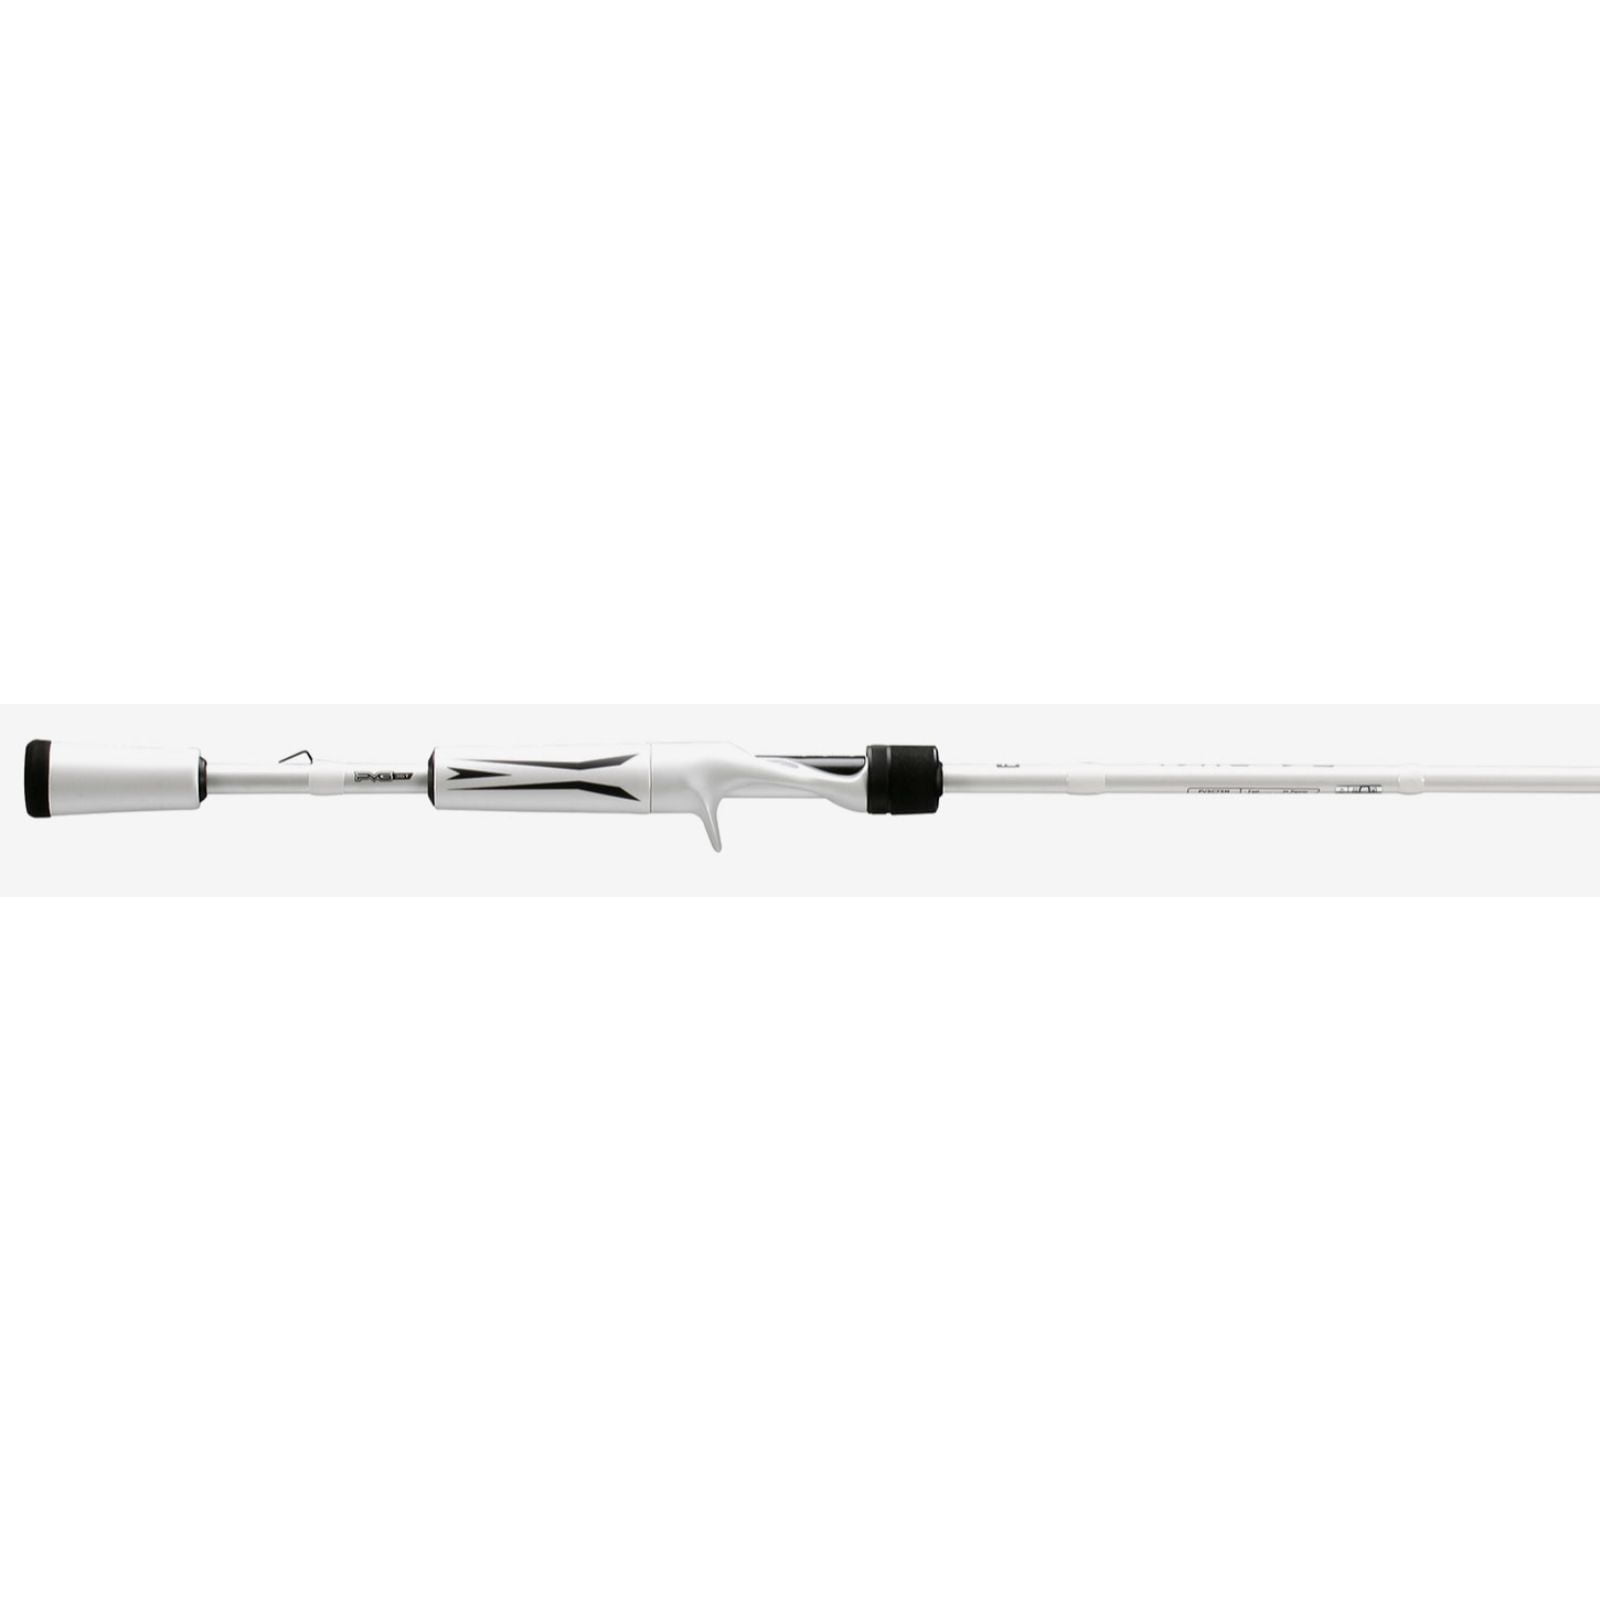 13 Fishing 1130232 7 ft. Fate V3 3 in. MH Casting Rod, White 